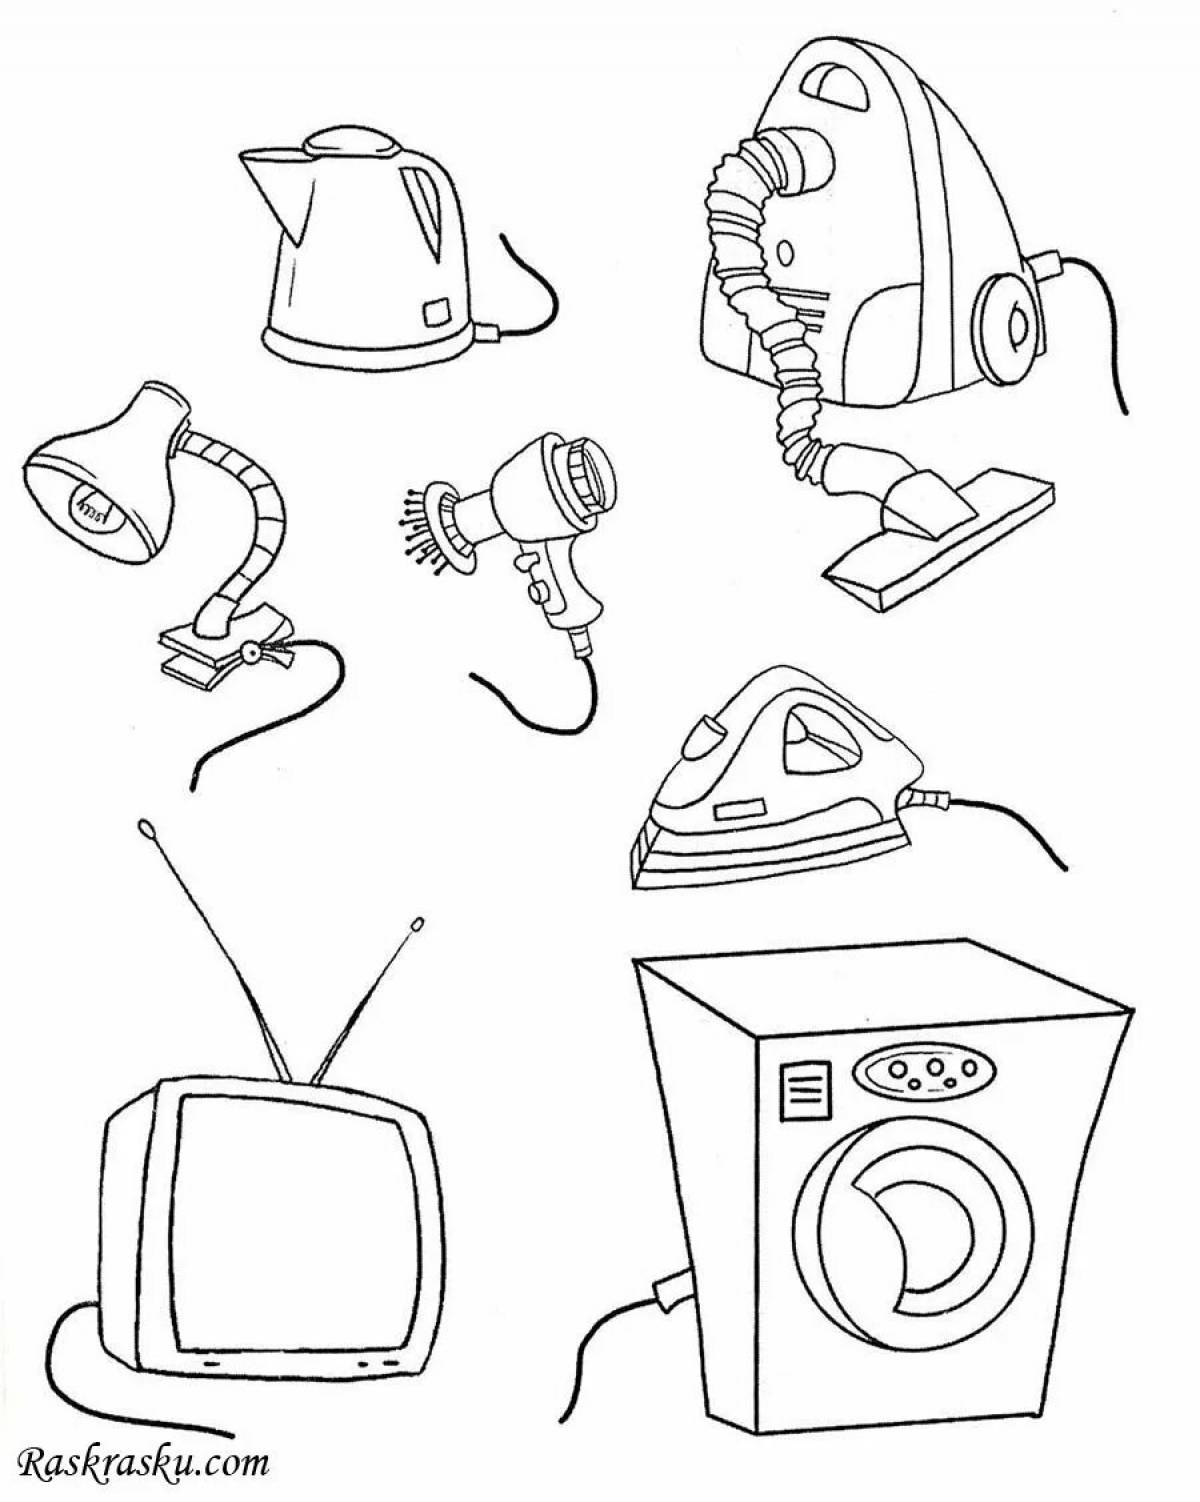 Household appliances for children 5 6 years old #20